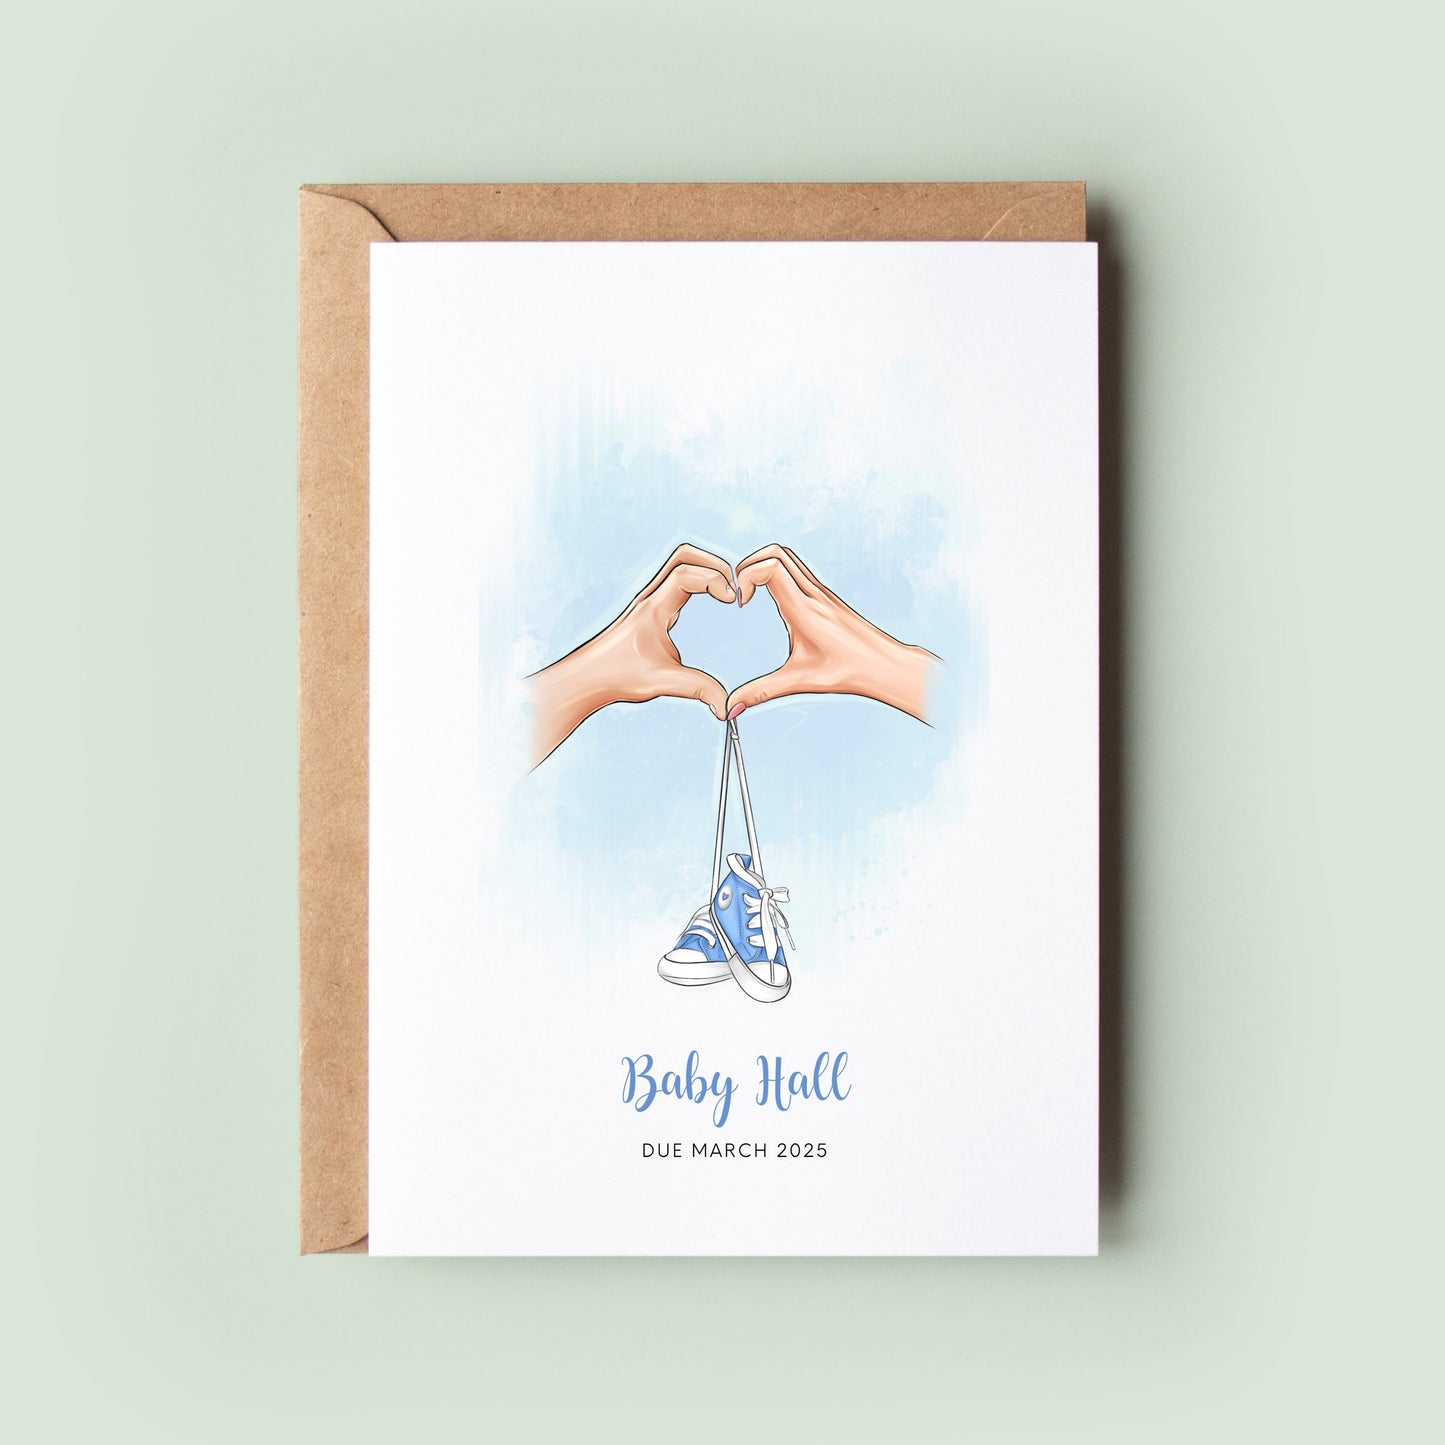 Pregnancy Announcement Card, Baby Announcement Card, Pregnancy Reveal Card, We're Having A Baby Card, New Baby, Personalised Baby